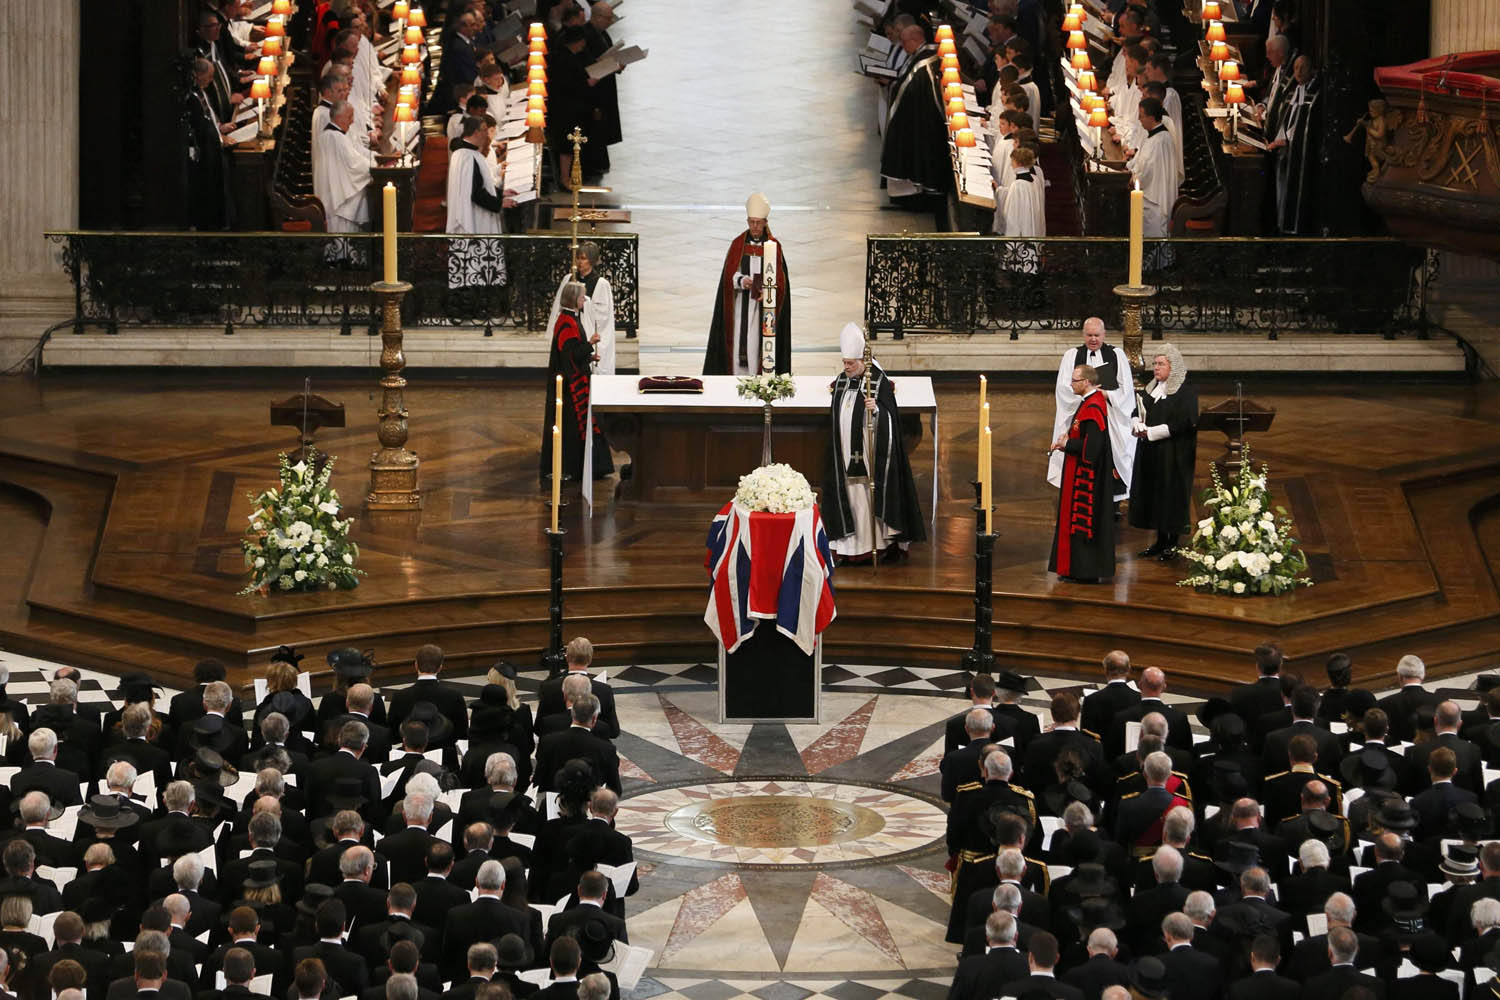 April 17, 2013. The Archbishop of London, Richard Chartres (C), walks behind the coffin of former British prime minister Margaret Thatcher during her funeral service at St Paul's Cathedral in London.